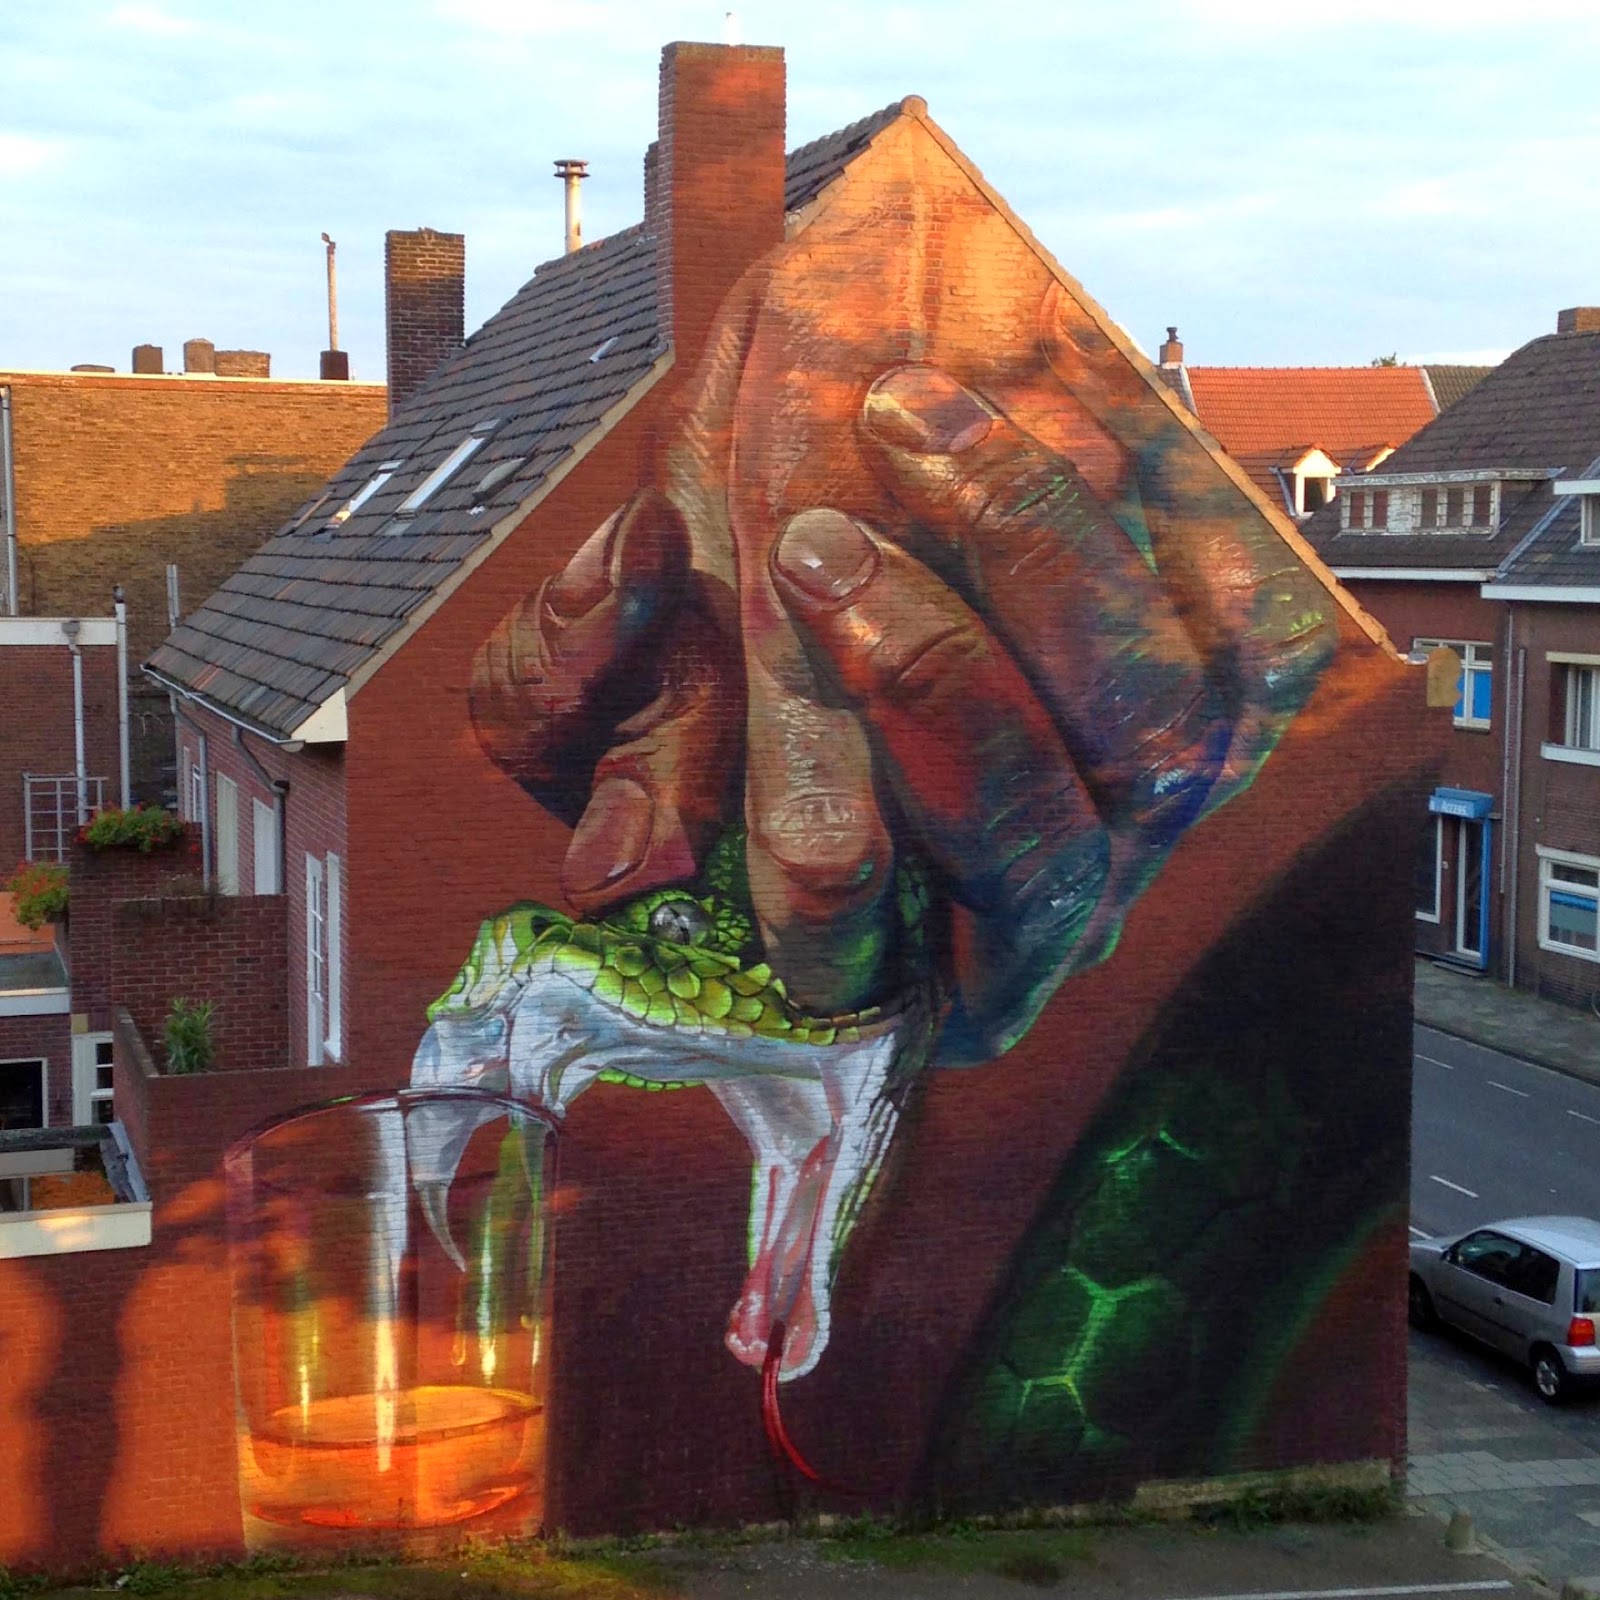 Andreas von Chrzanowski aka Case Ma'Claim is currently in Netherlands where he just wrapped up this new piece on the streets of Heerlen in Netherlands.